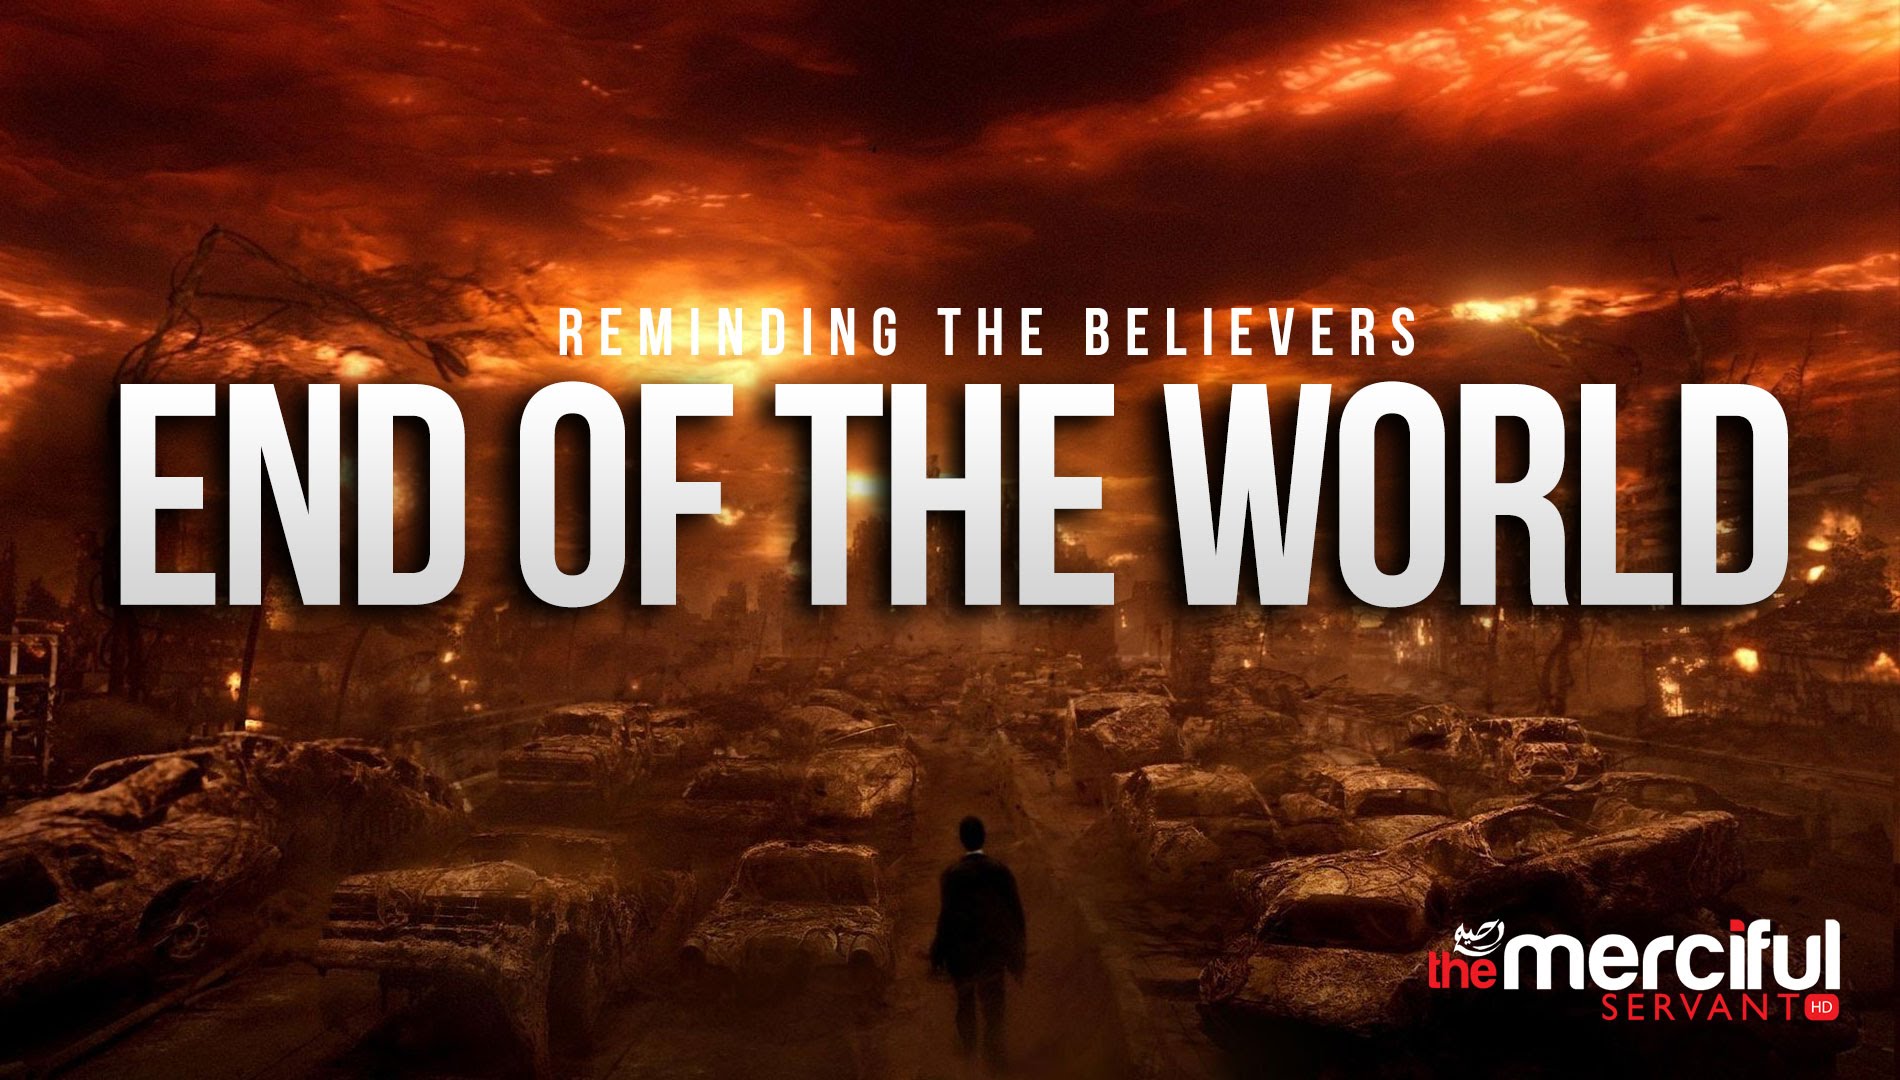 The End of The World - When Will It Happen?